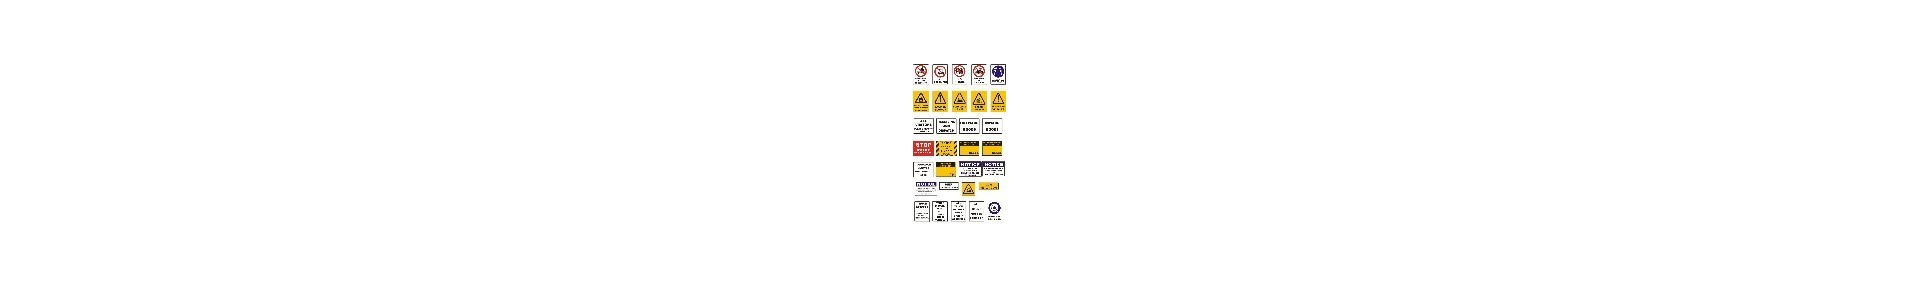 Warehouse and Safety Signs Canada.